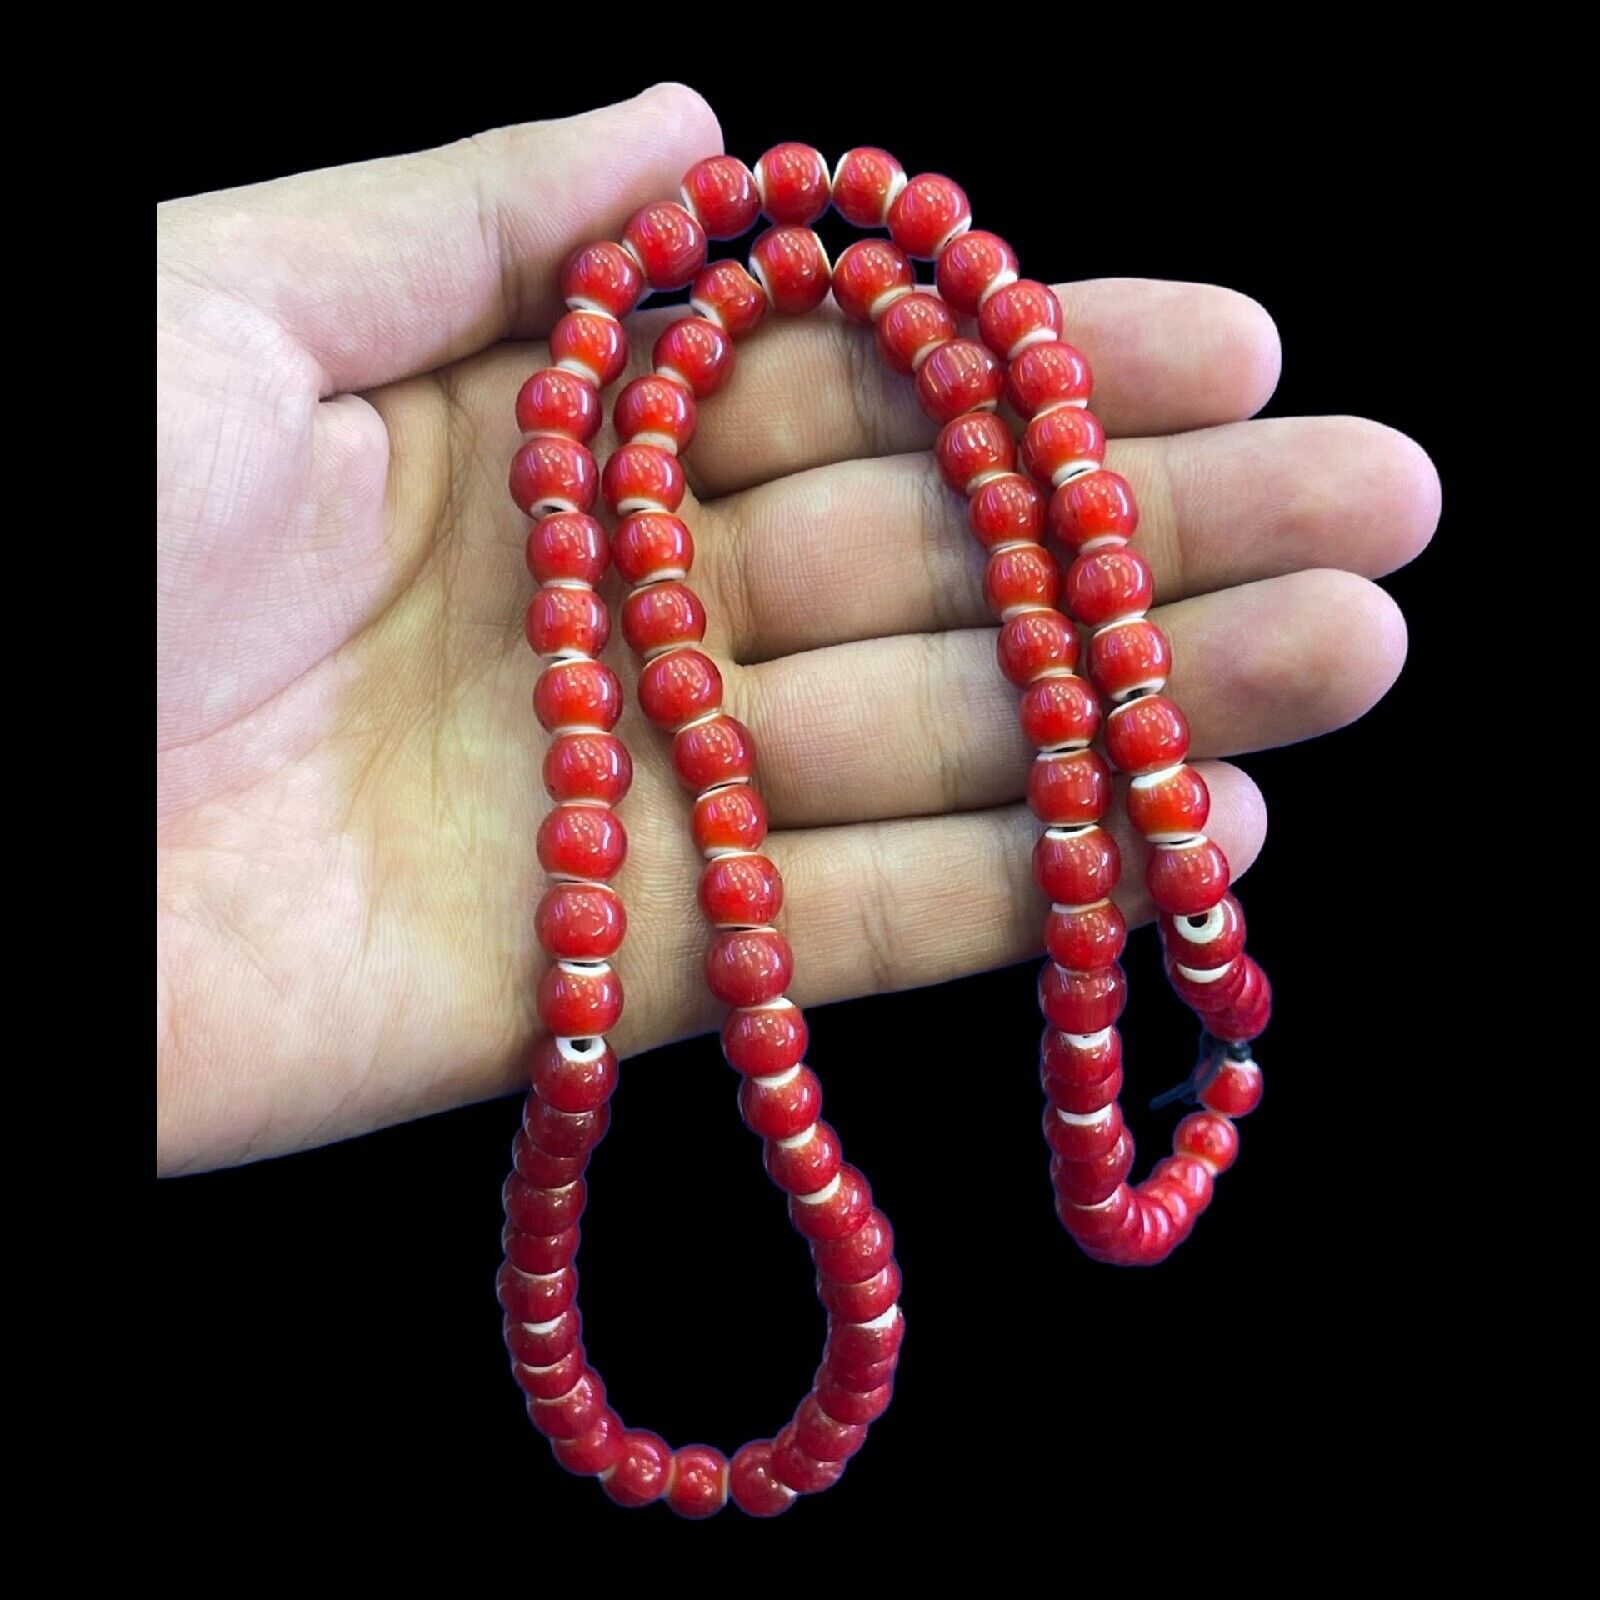 10mm Antique Venetain Red White Heart Trade Beads Lot Beads Strand Necklace 